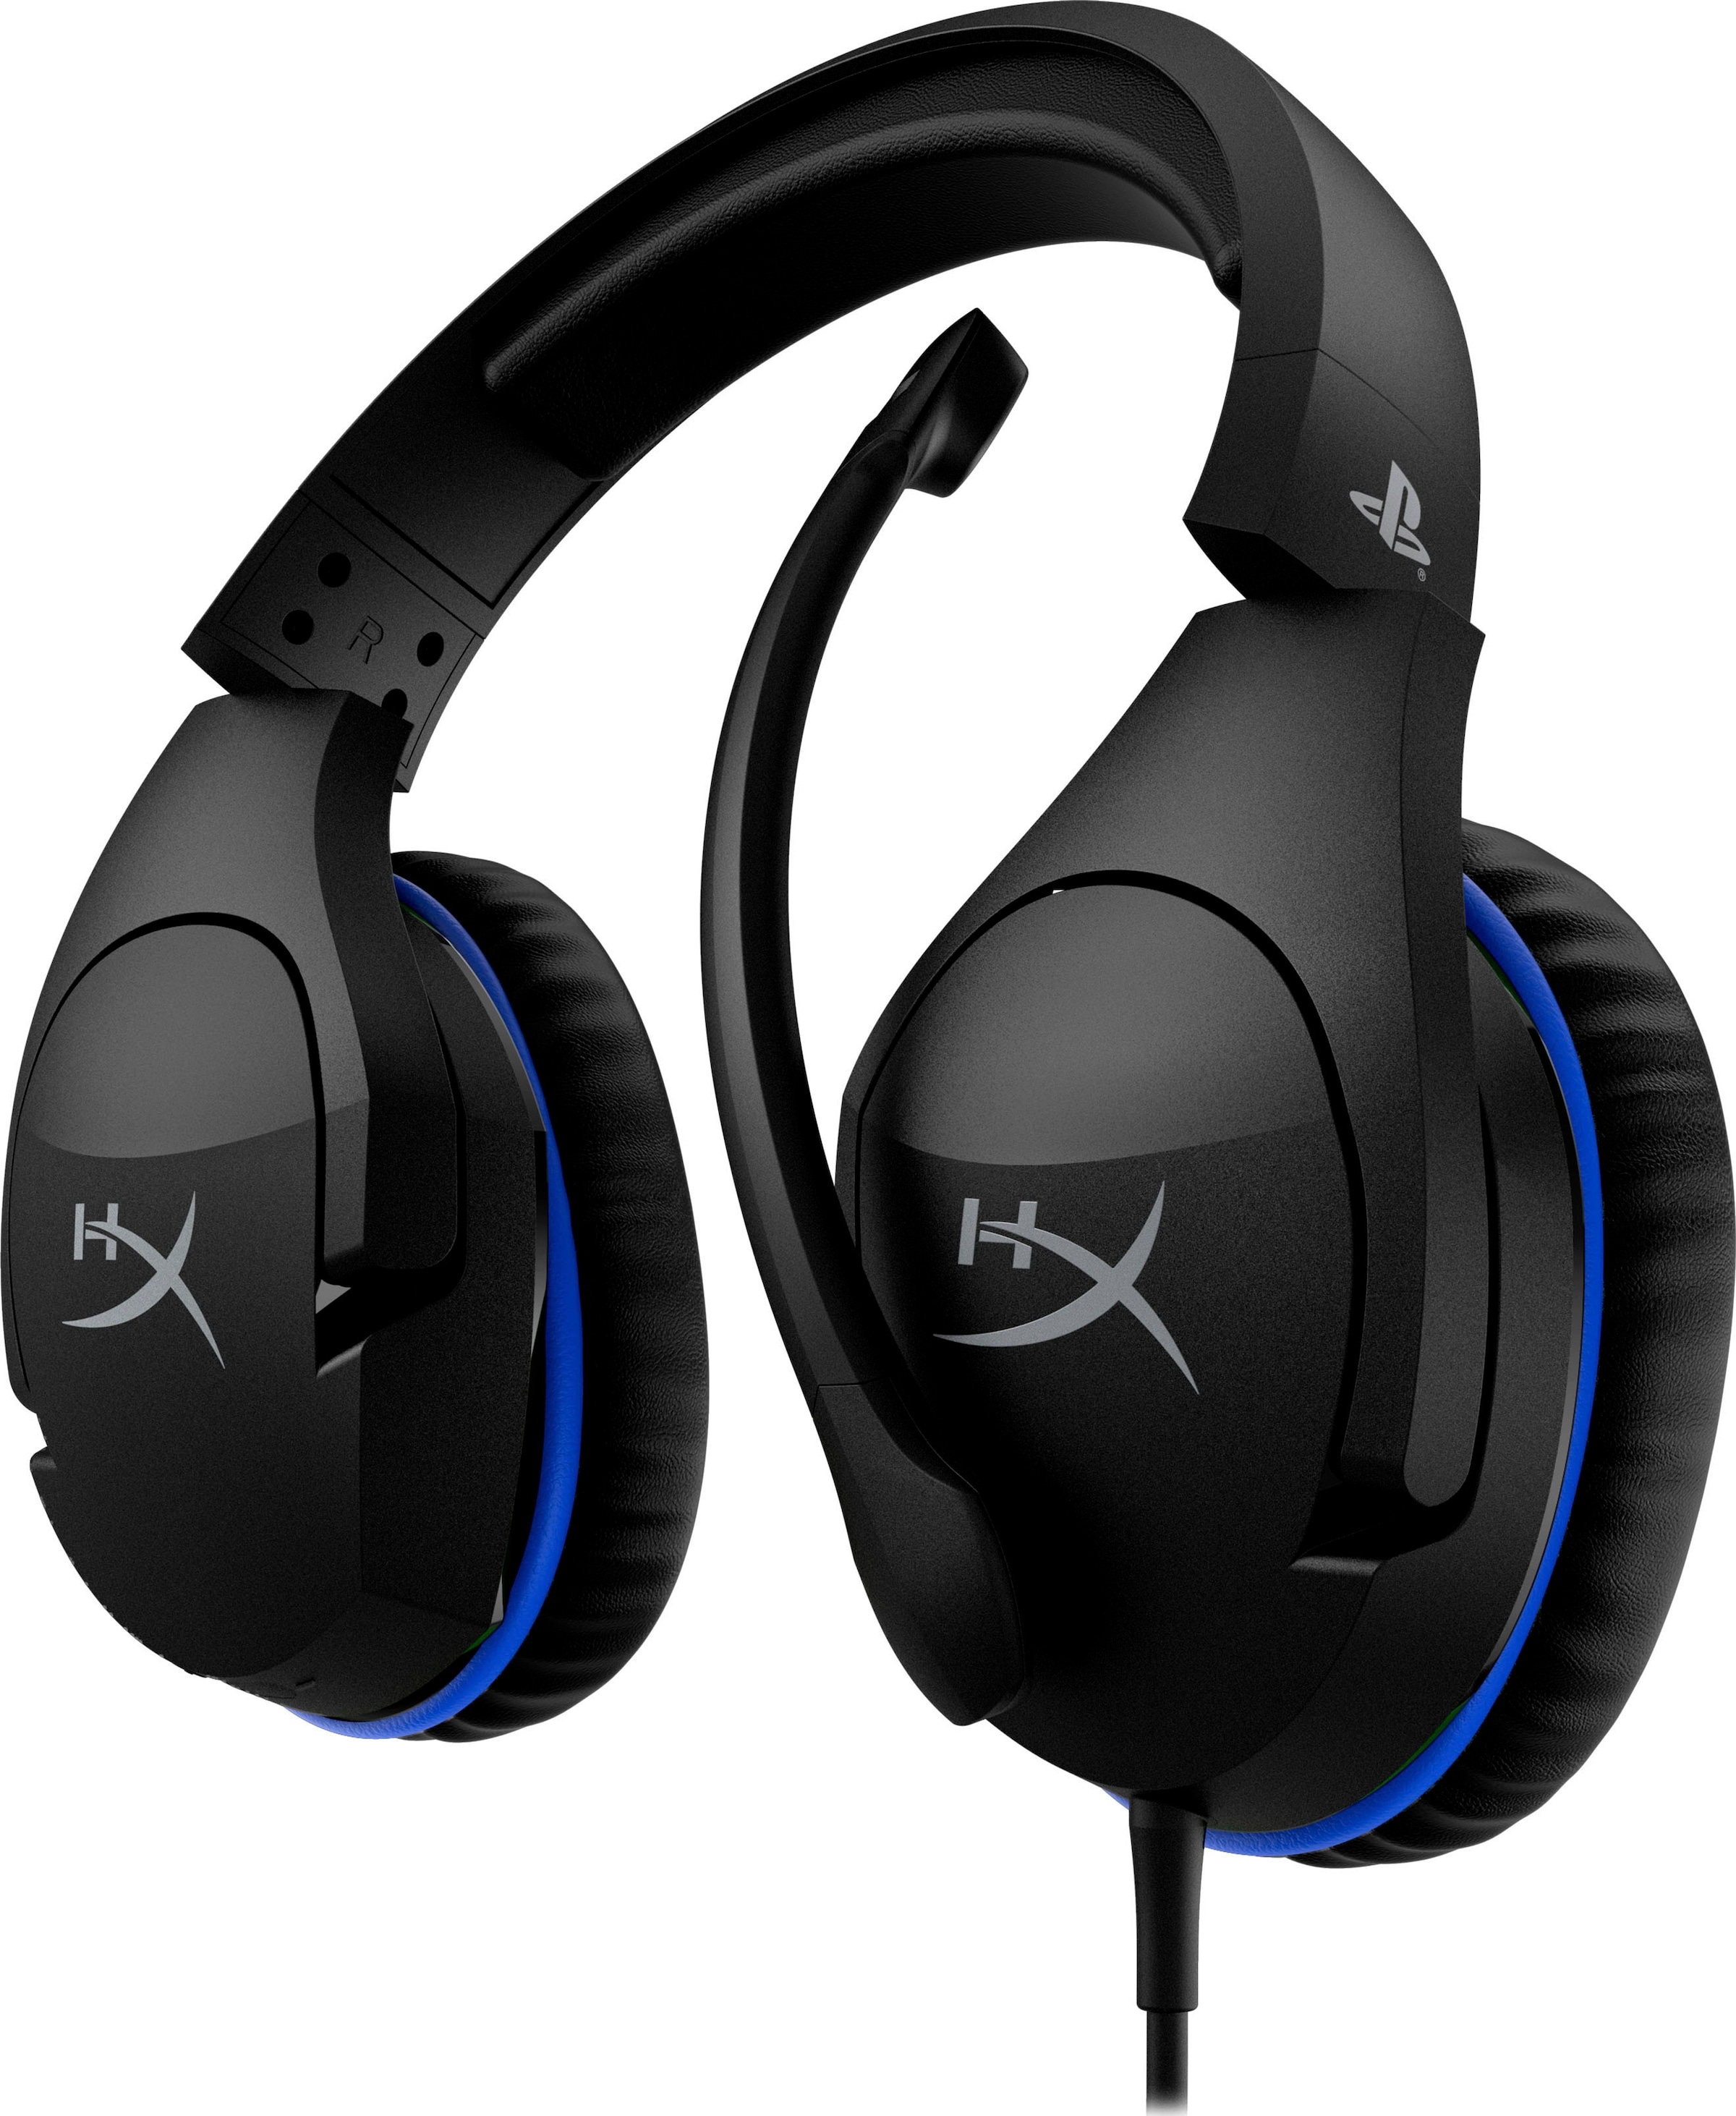 HyperX Gaming-Headset »Cloud Stinger (PS4 bei Licensed)«, OTTO Mikrofon jetzt abnehmbar